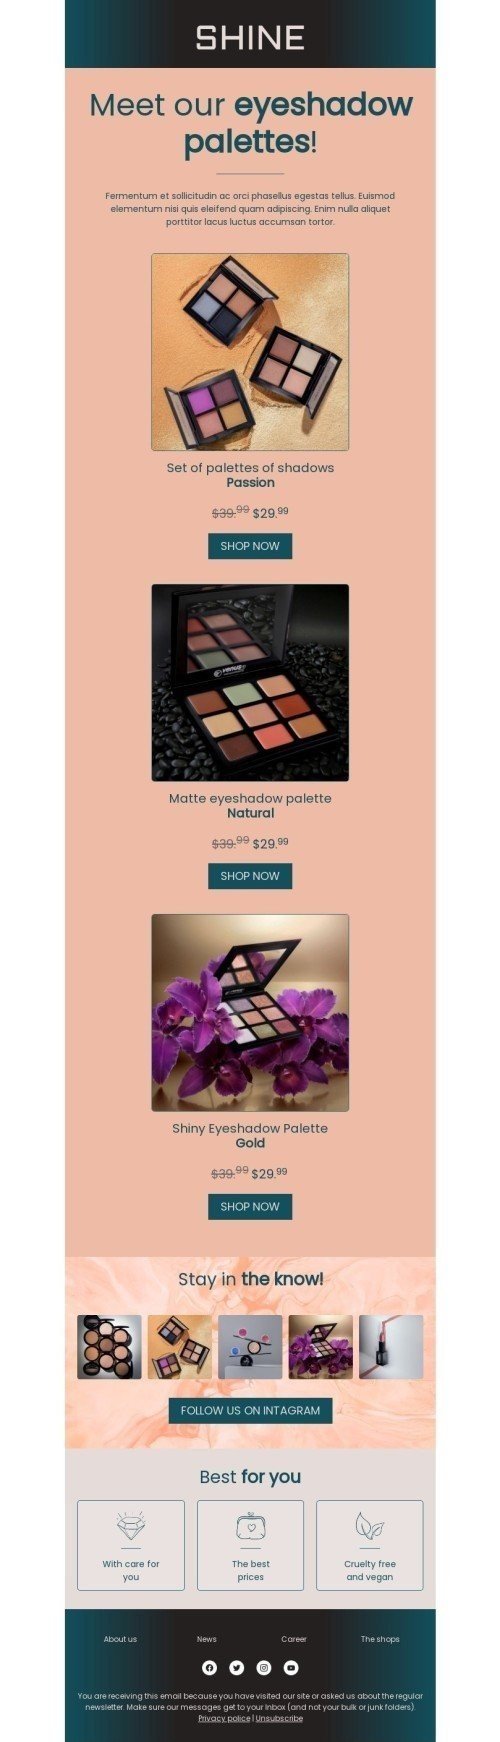 Product Launch Announcement Email Template "Meet eyeshadow palettes" for Beauty & Personal Care industry desktop view